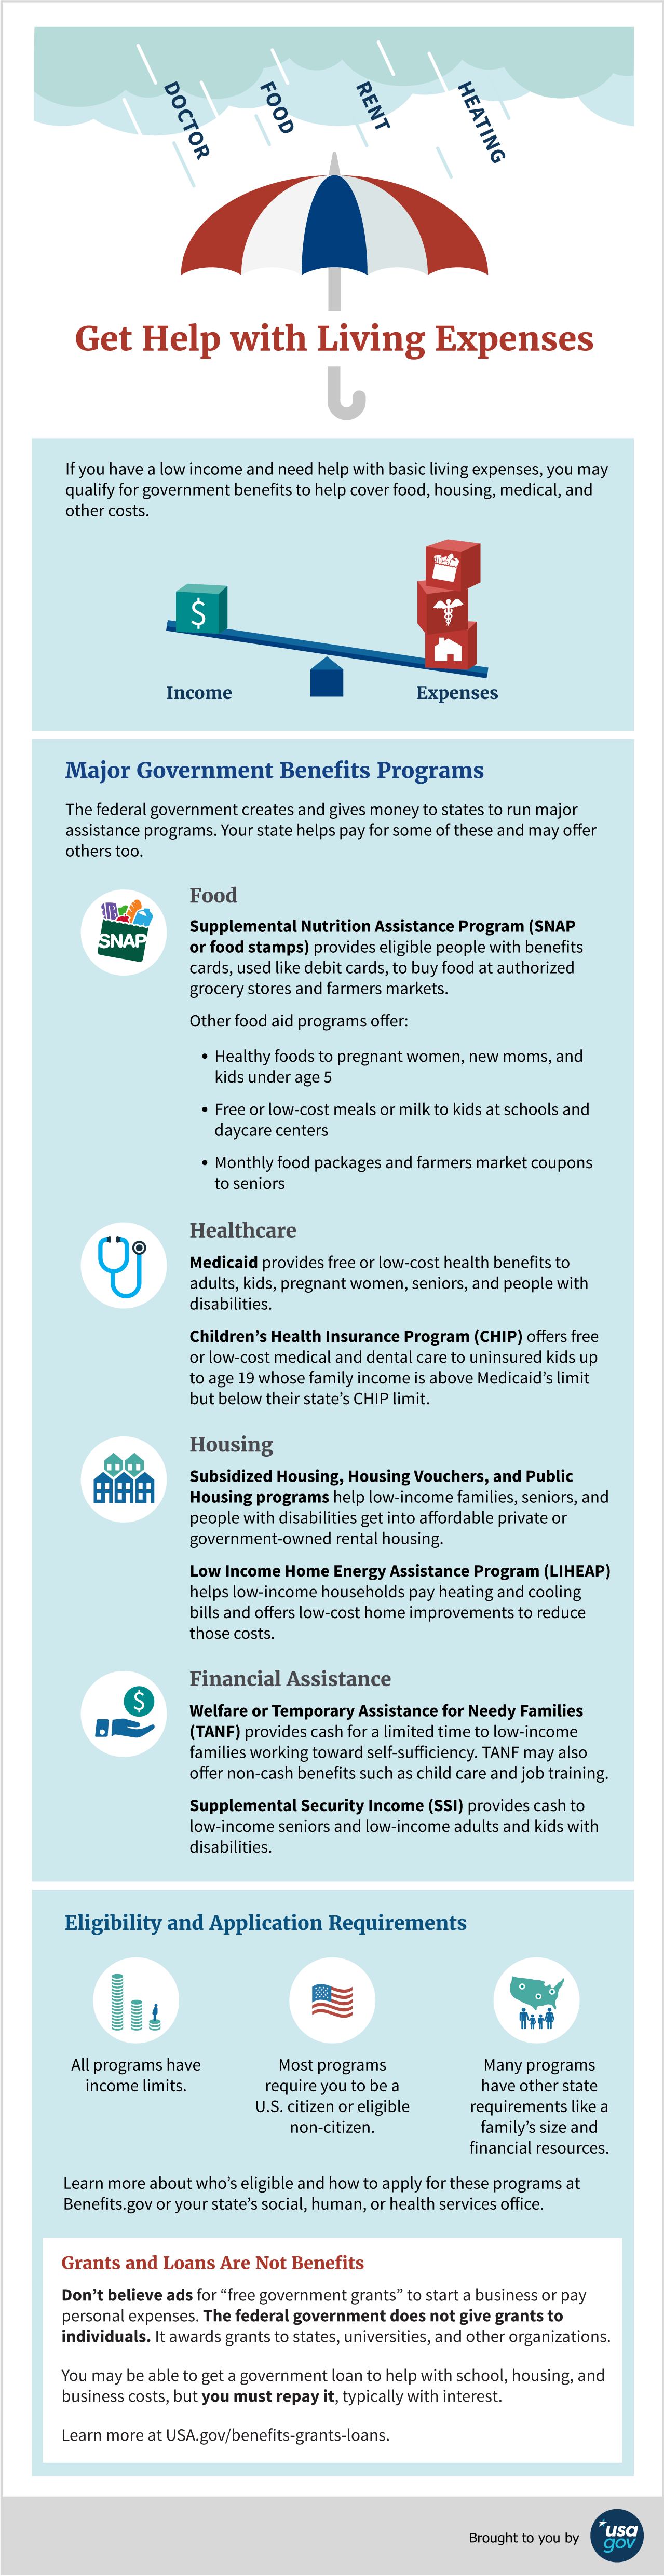 Infographic explaining government benefits for people with a low income.